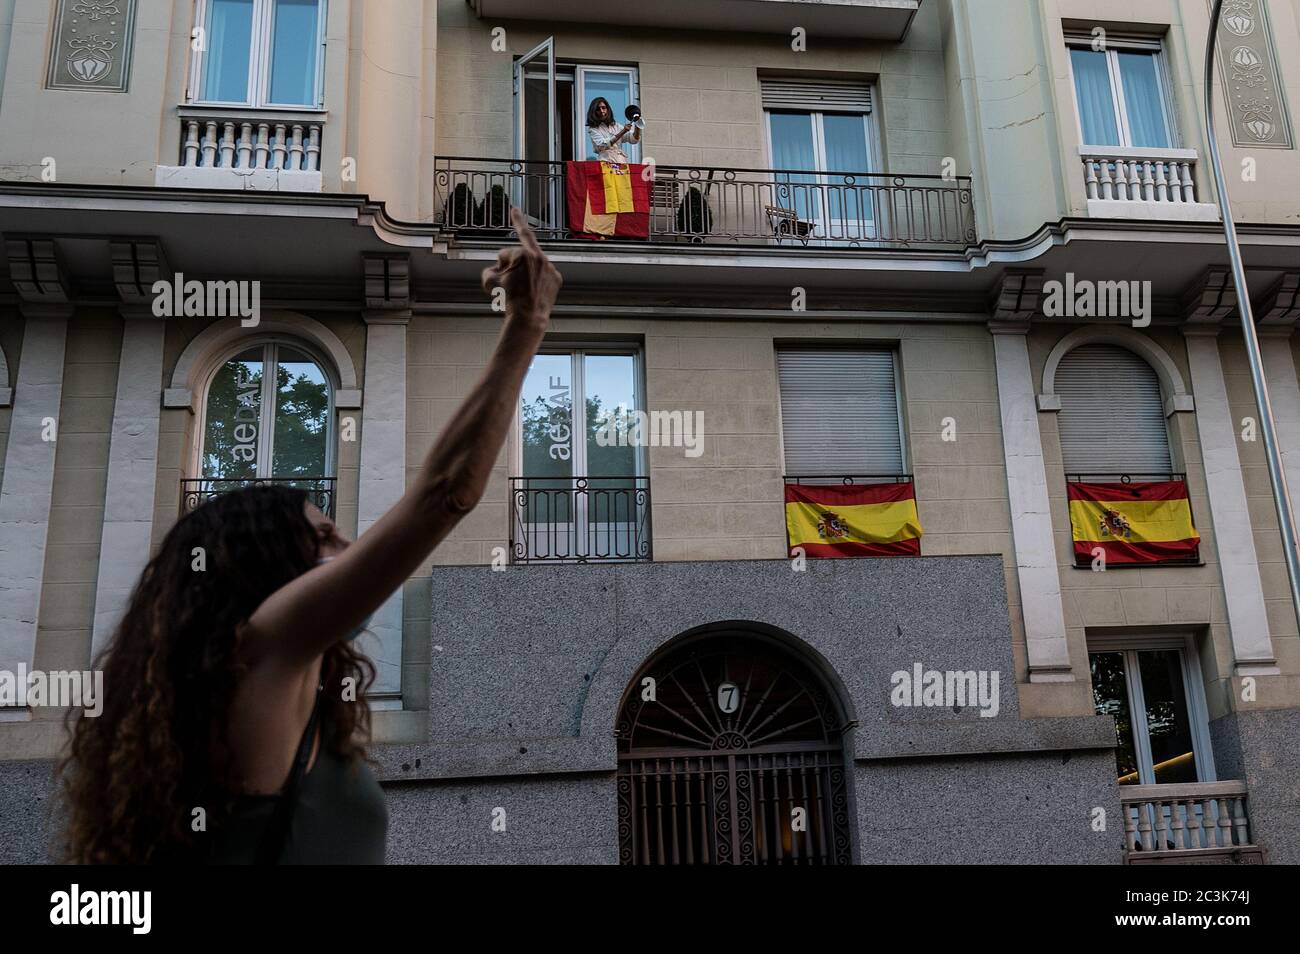 Madrid, Spain. 20th June, 2020. Madrid, Spain. June 20, 2020. A woman banging a pan making noise in a balcony against a demonstration in support of the public healthcare system. Healthcare workers are carrying out protests during the coronavirus crisis against the precariousness of their work. Credit: Marcos del Mazo/Alamy Live News Stock Photo